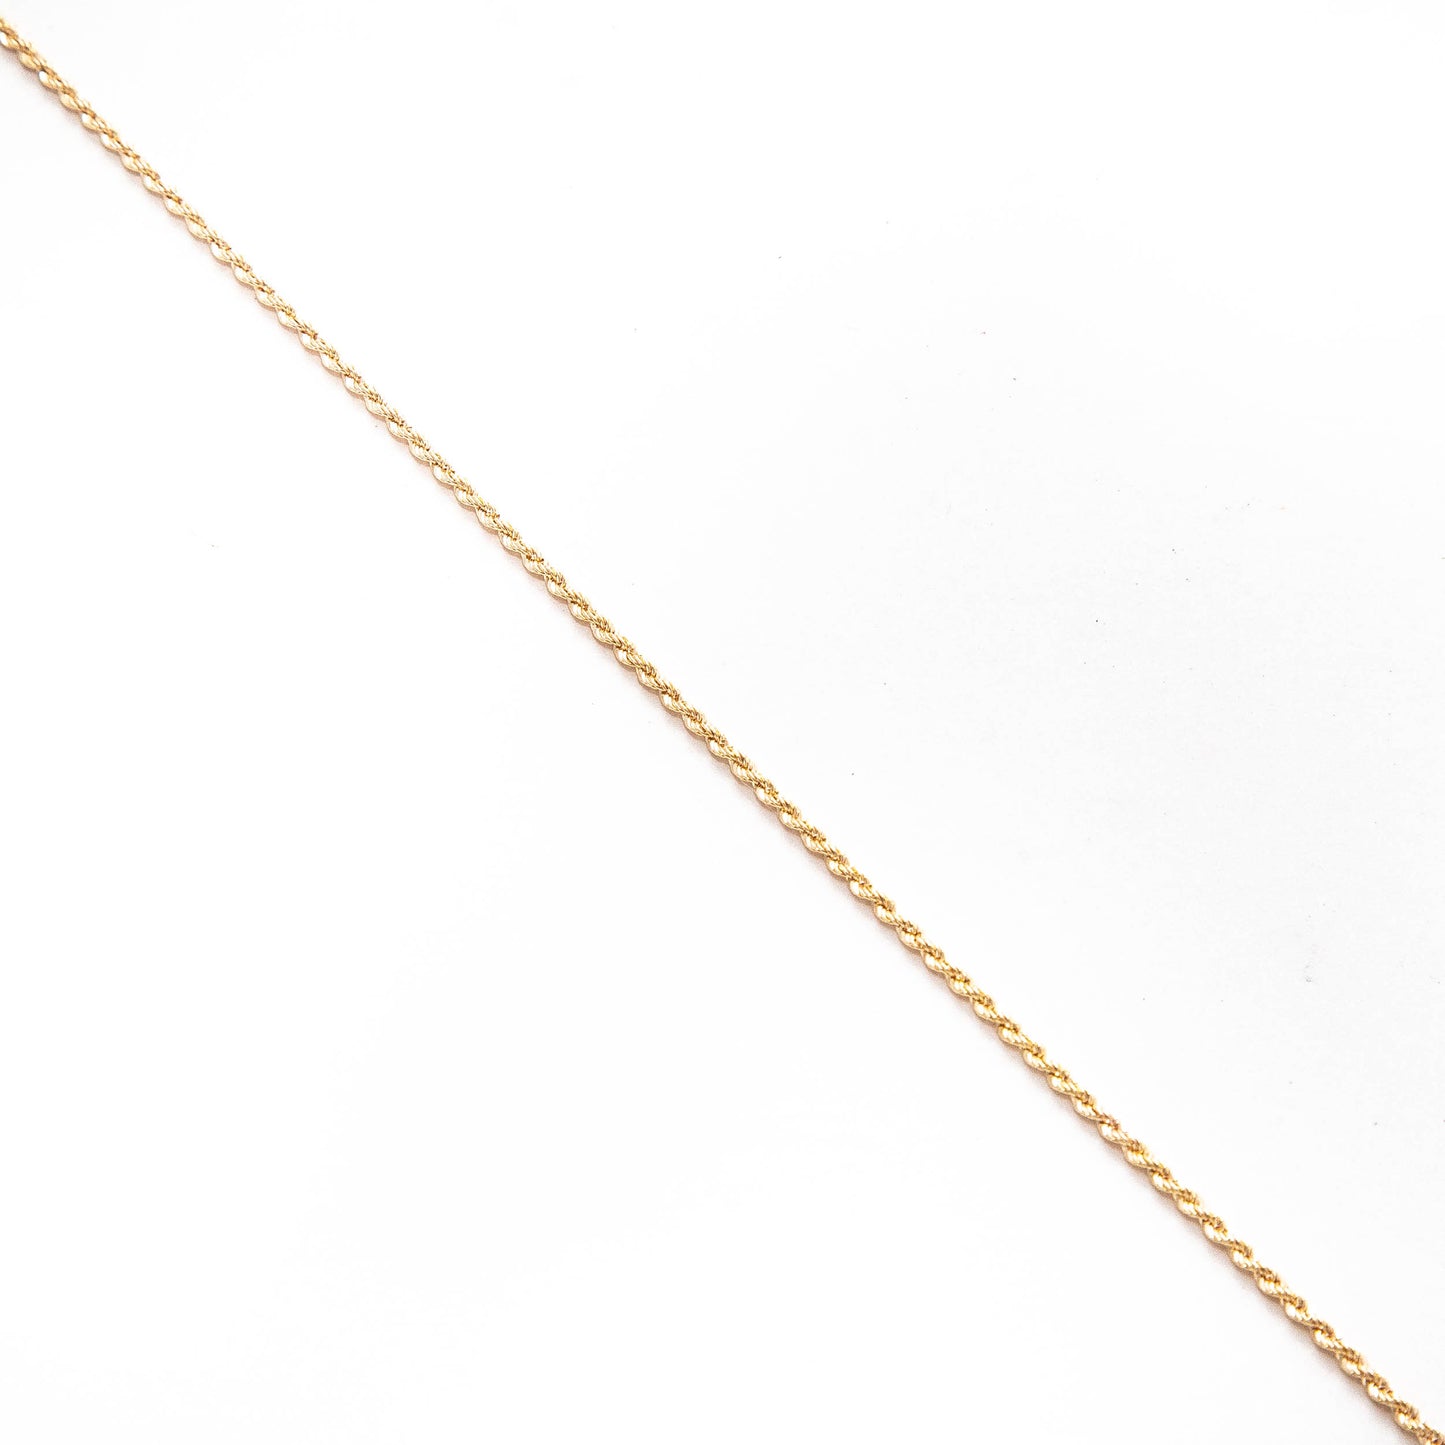 Major Chain - Solid 9ct Gold